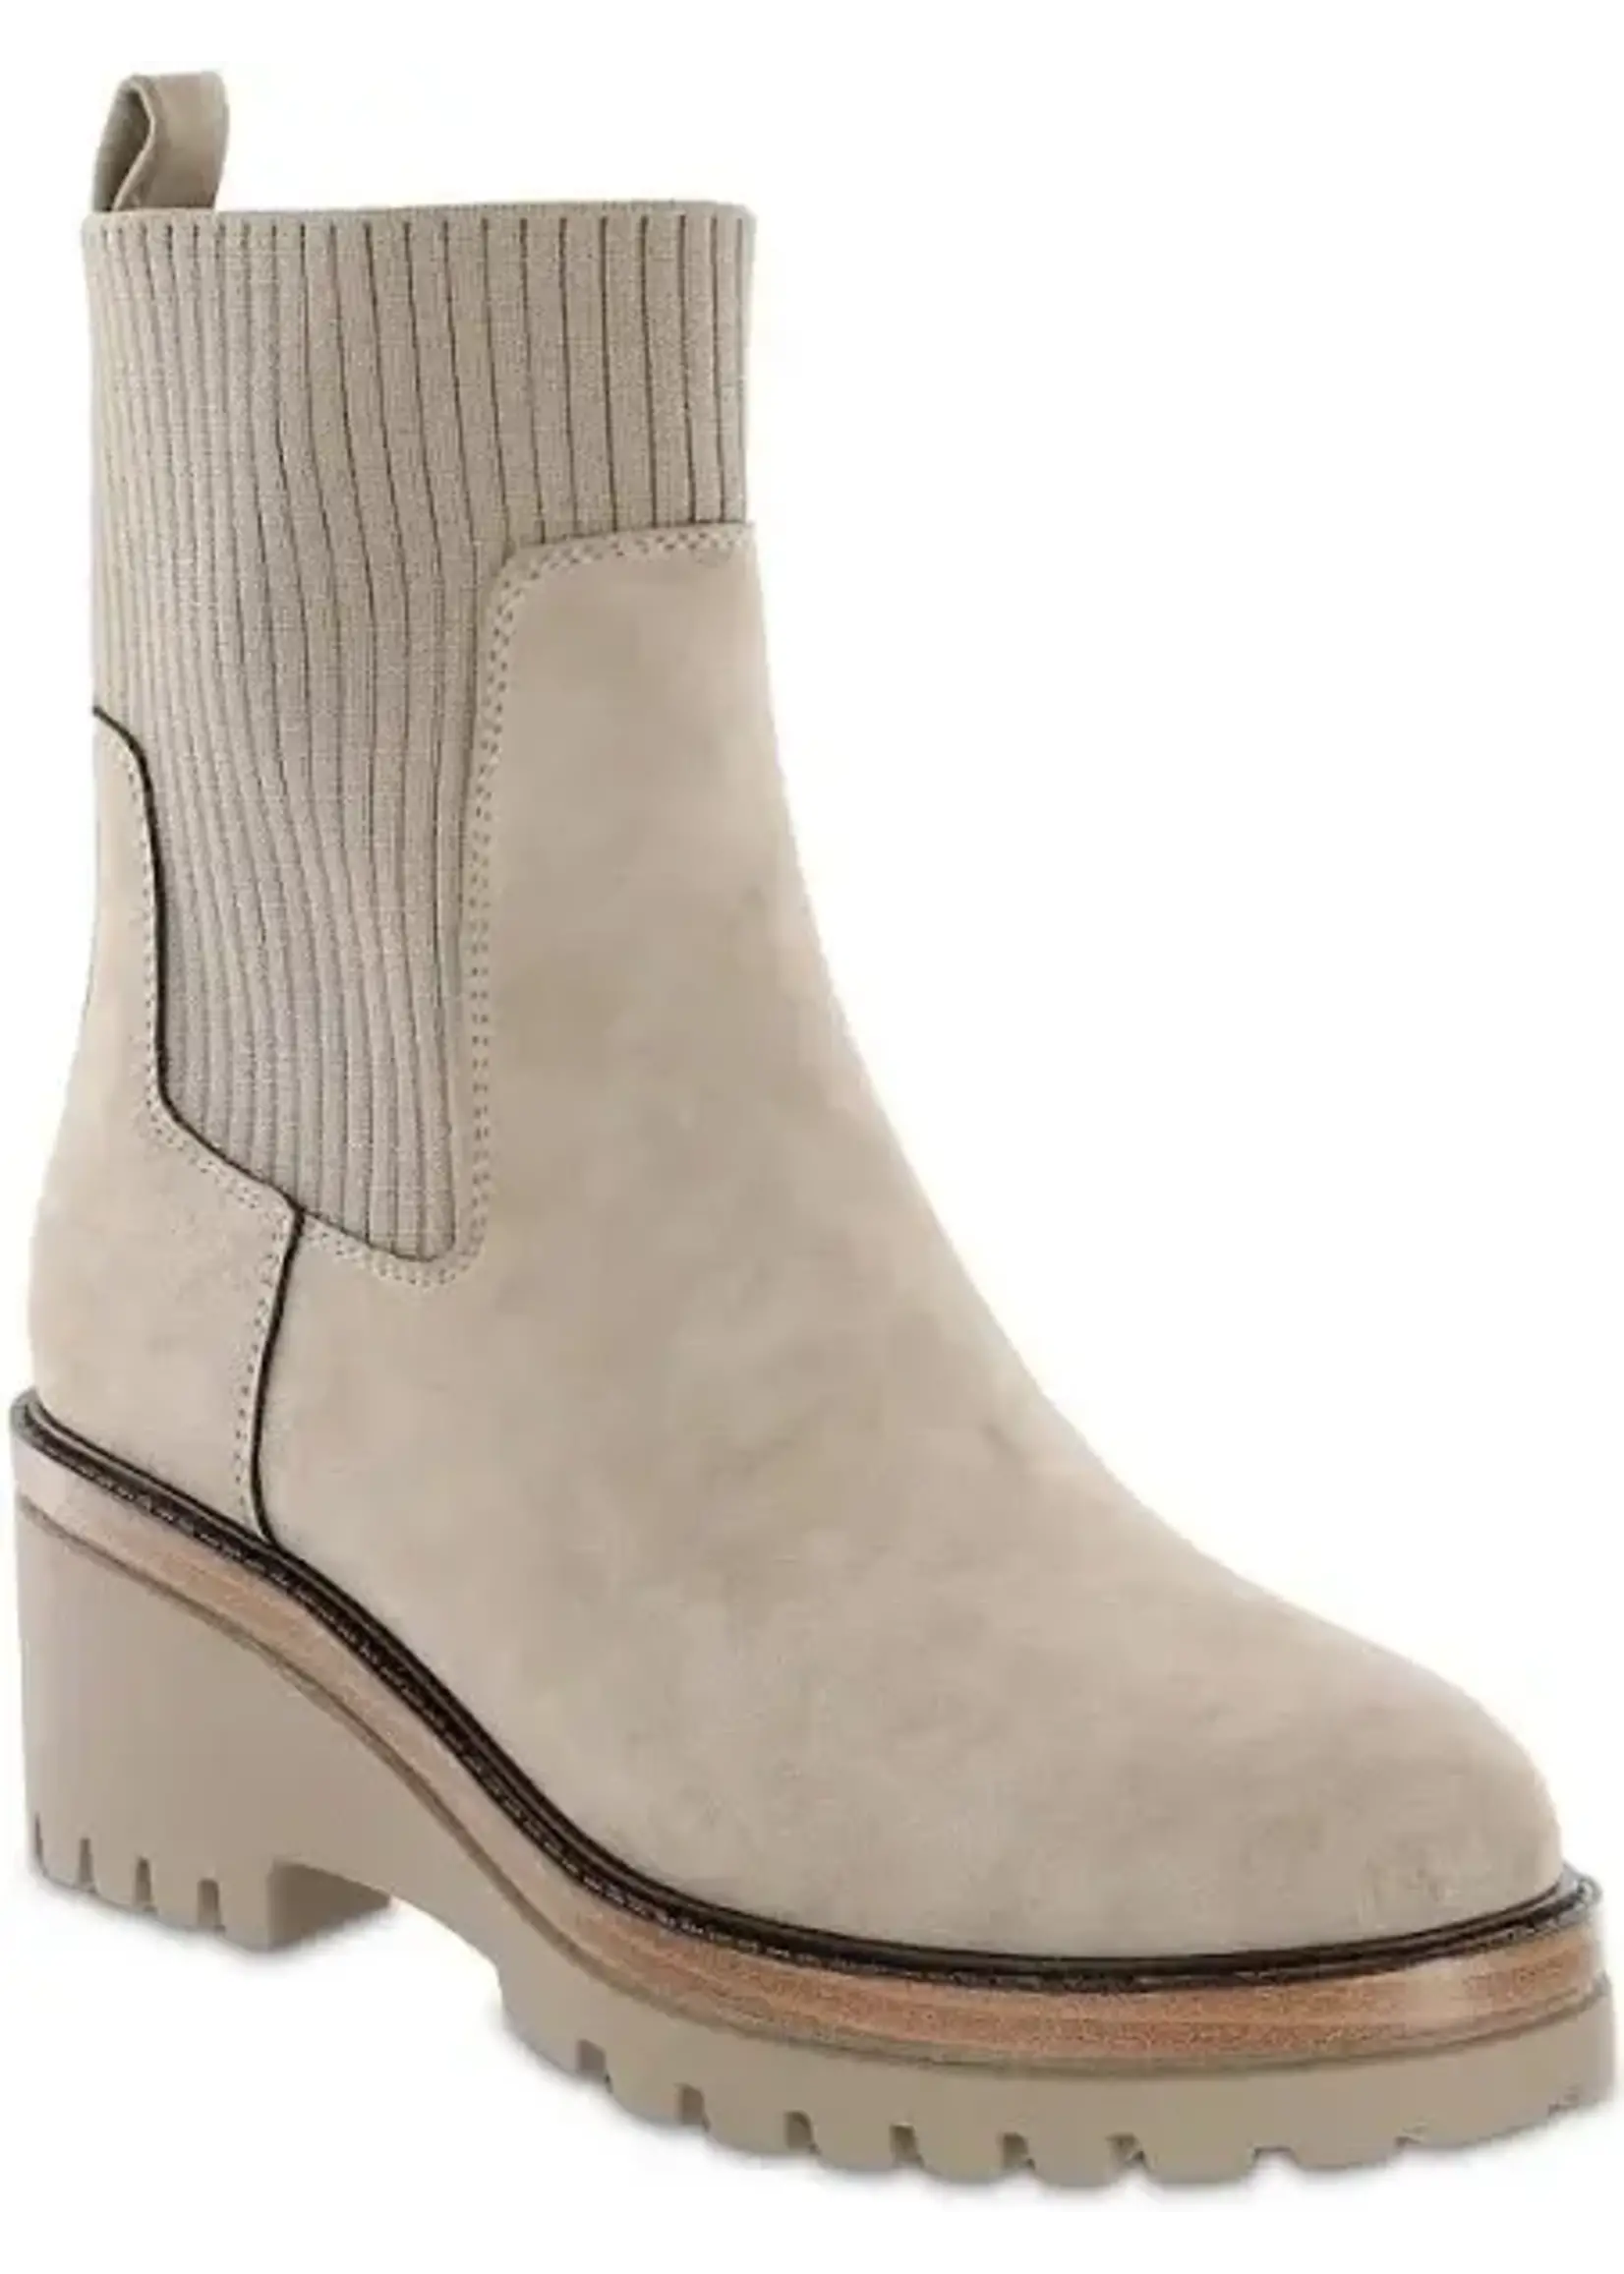 Mia Shoes Soraya Wedge Sock Boot in Taupe by Mia Footwear 25% Off